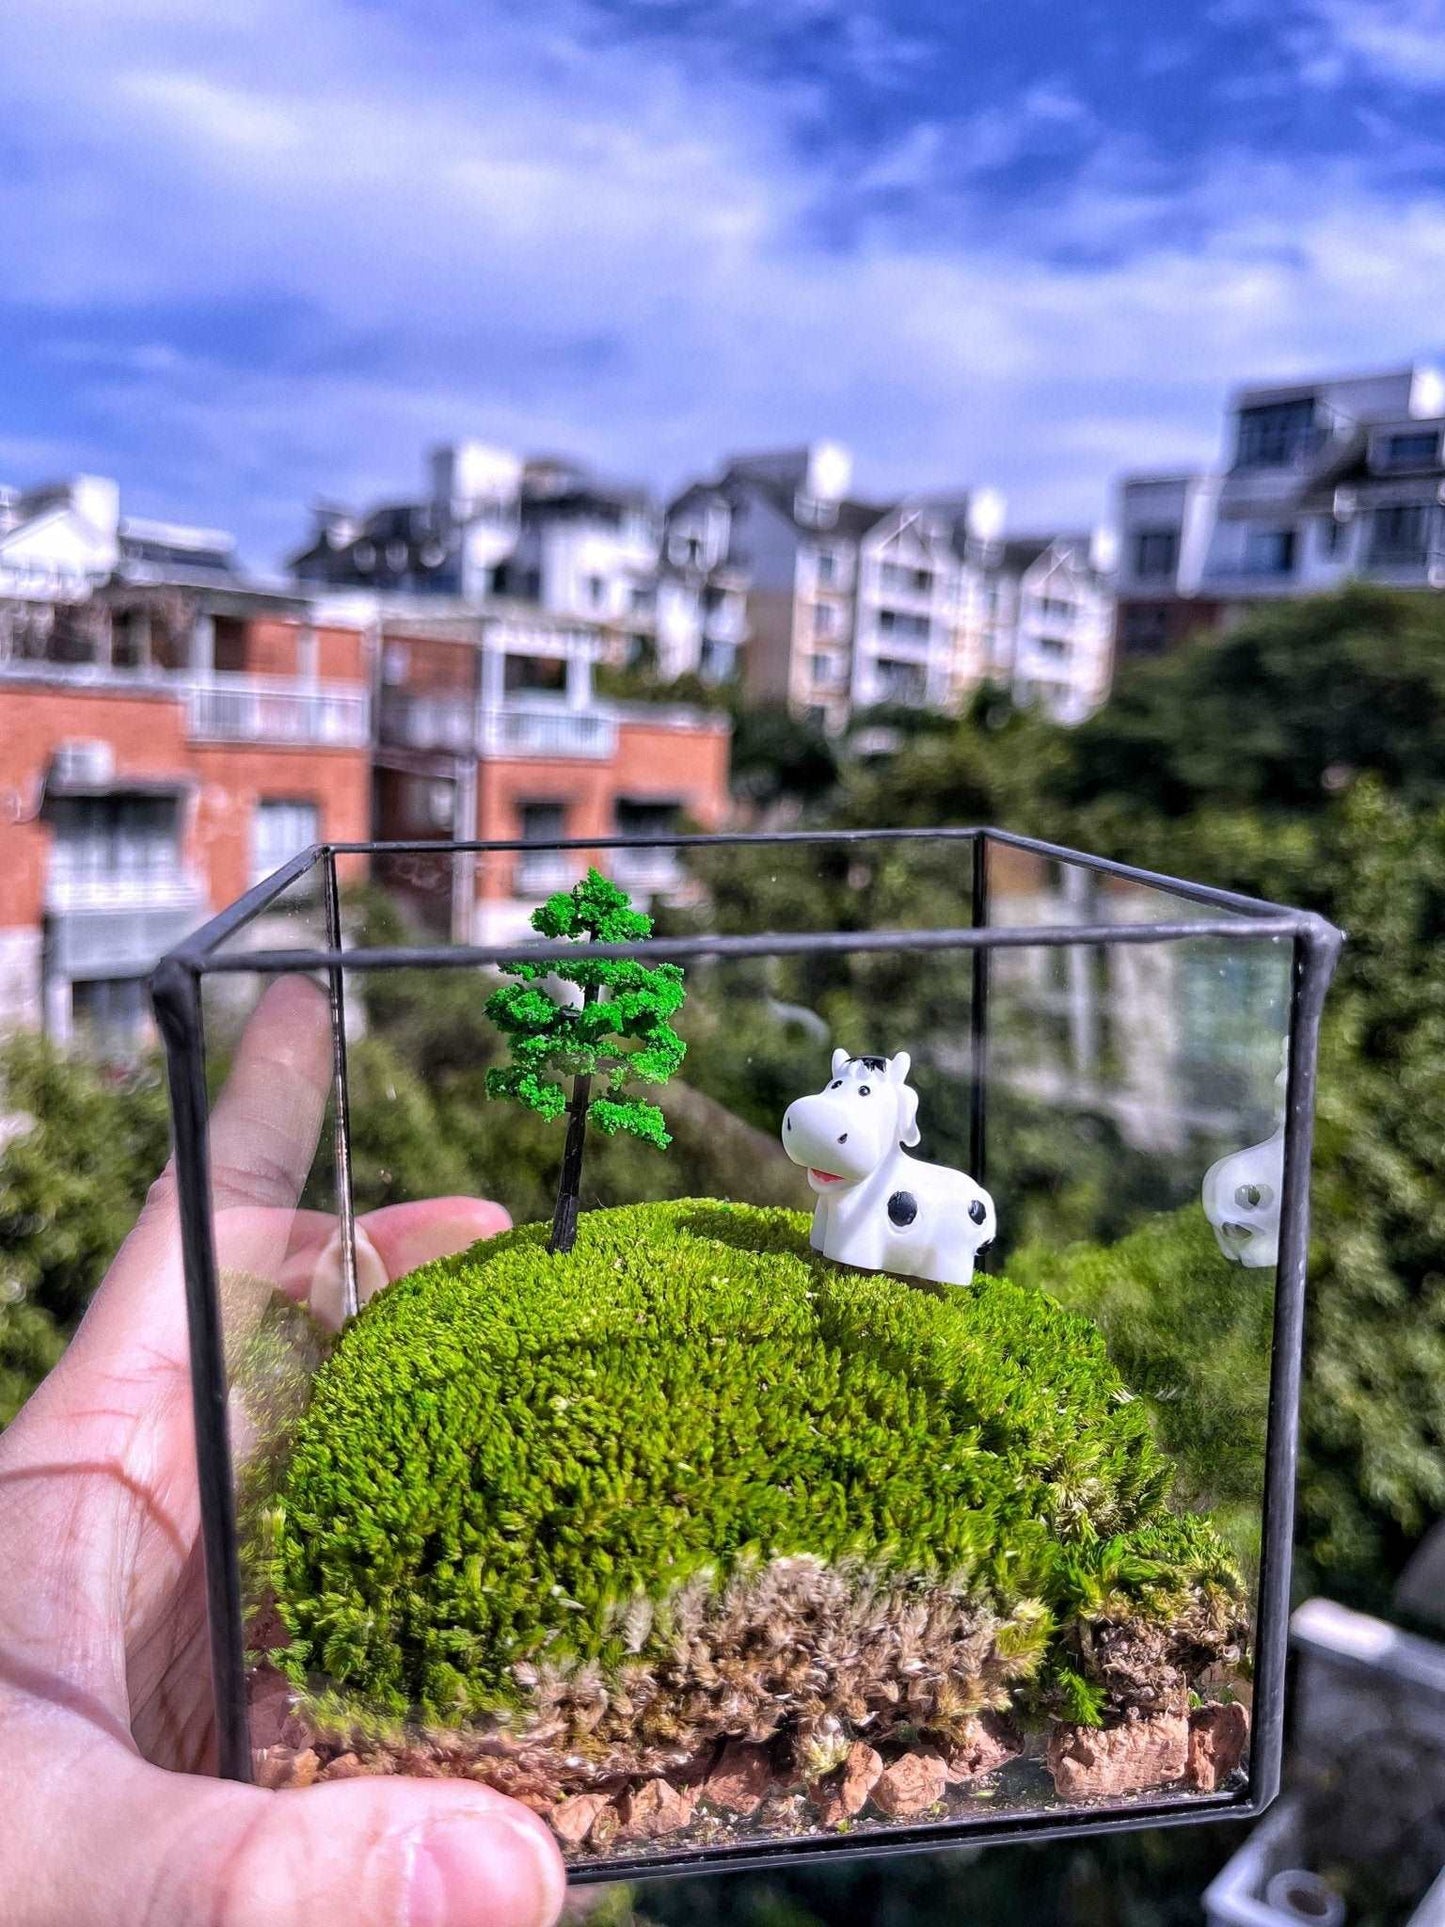 Handmade Glass Terrarium Mossbox Happy Chubby Cow Micro Landscape withElevate your workspace with the "Happy Chubby Cow" Handmade Glass Terrarium - a whimsical creation that captures the pastoral charm within a large square glass conta